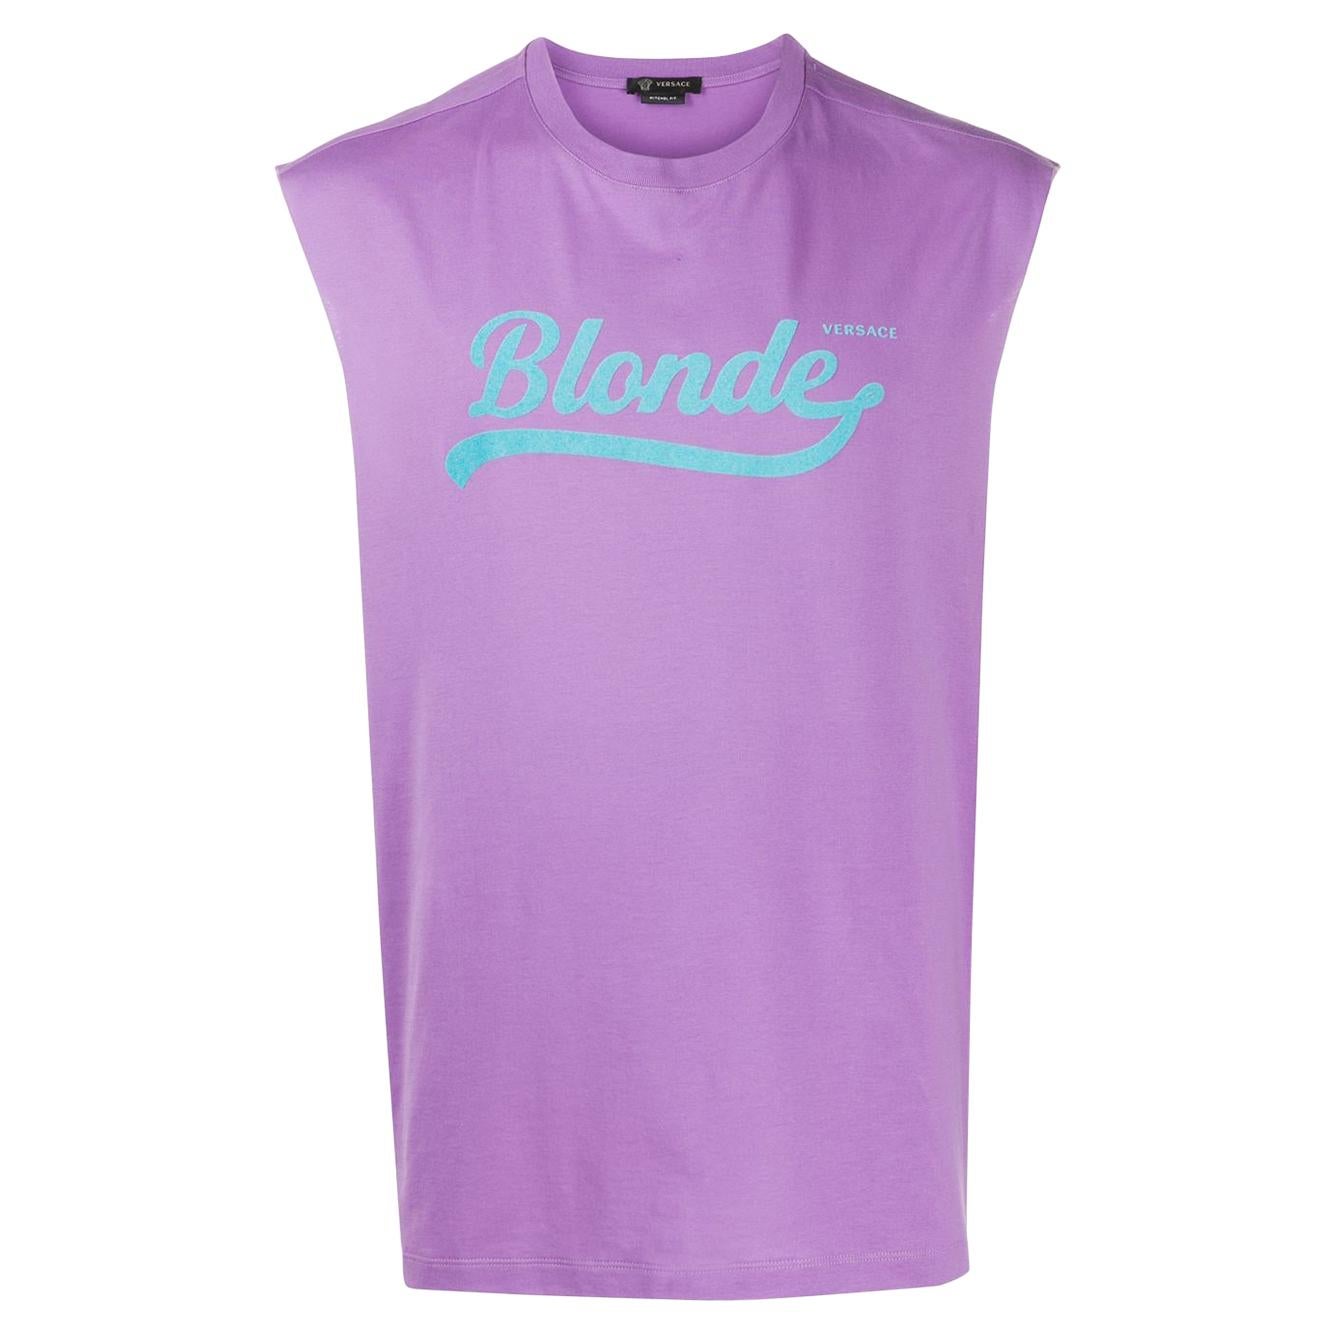 Versace Mens SS20 "Blonde" Lavender Sleeveless Muscle Tee Size Large